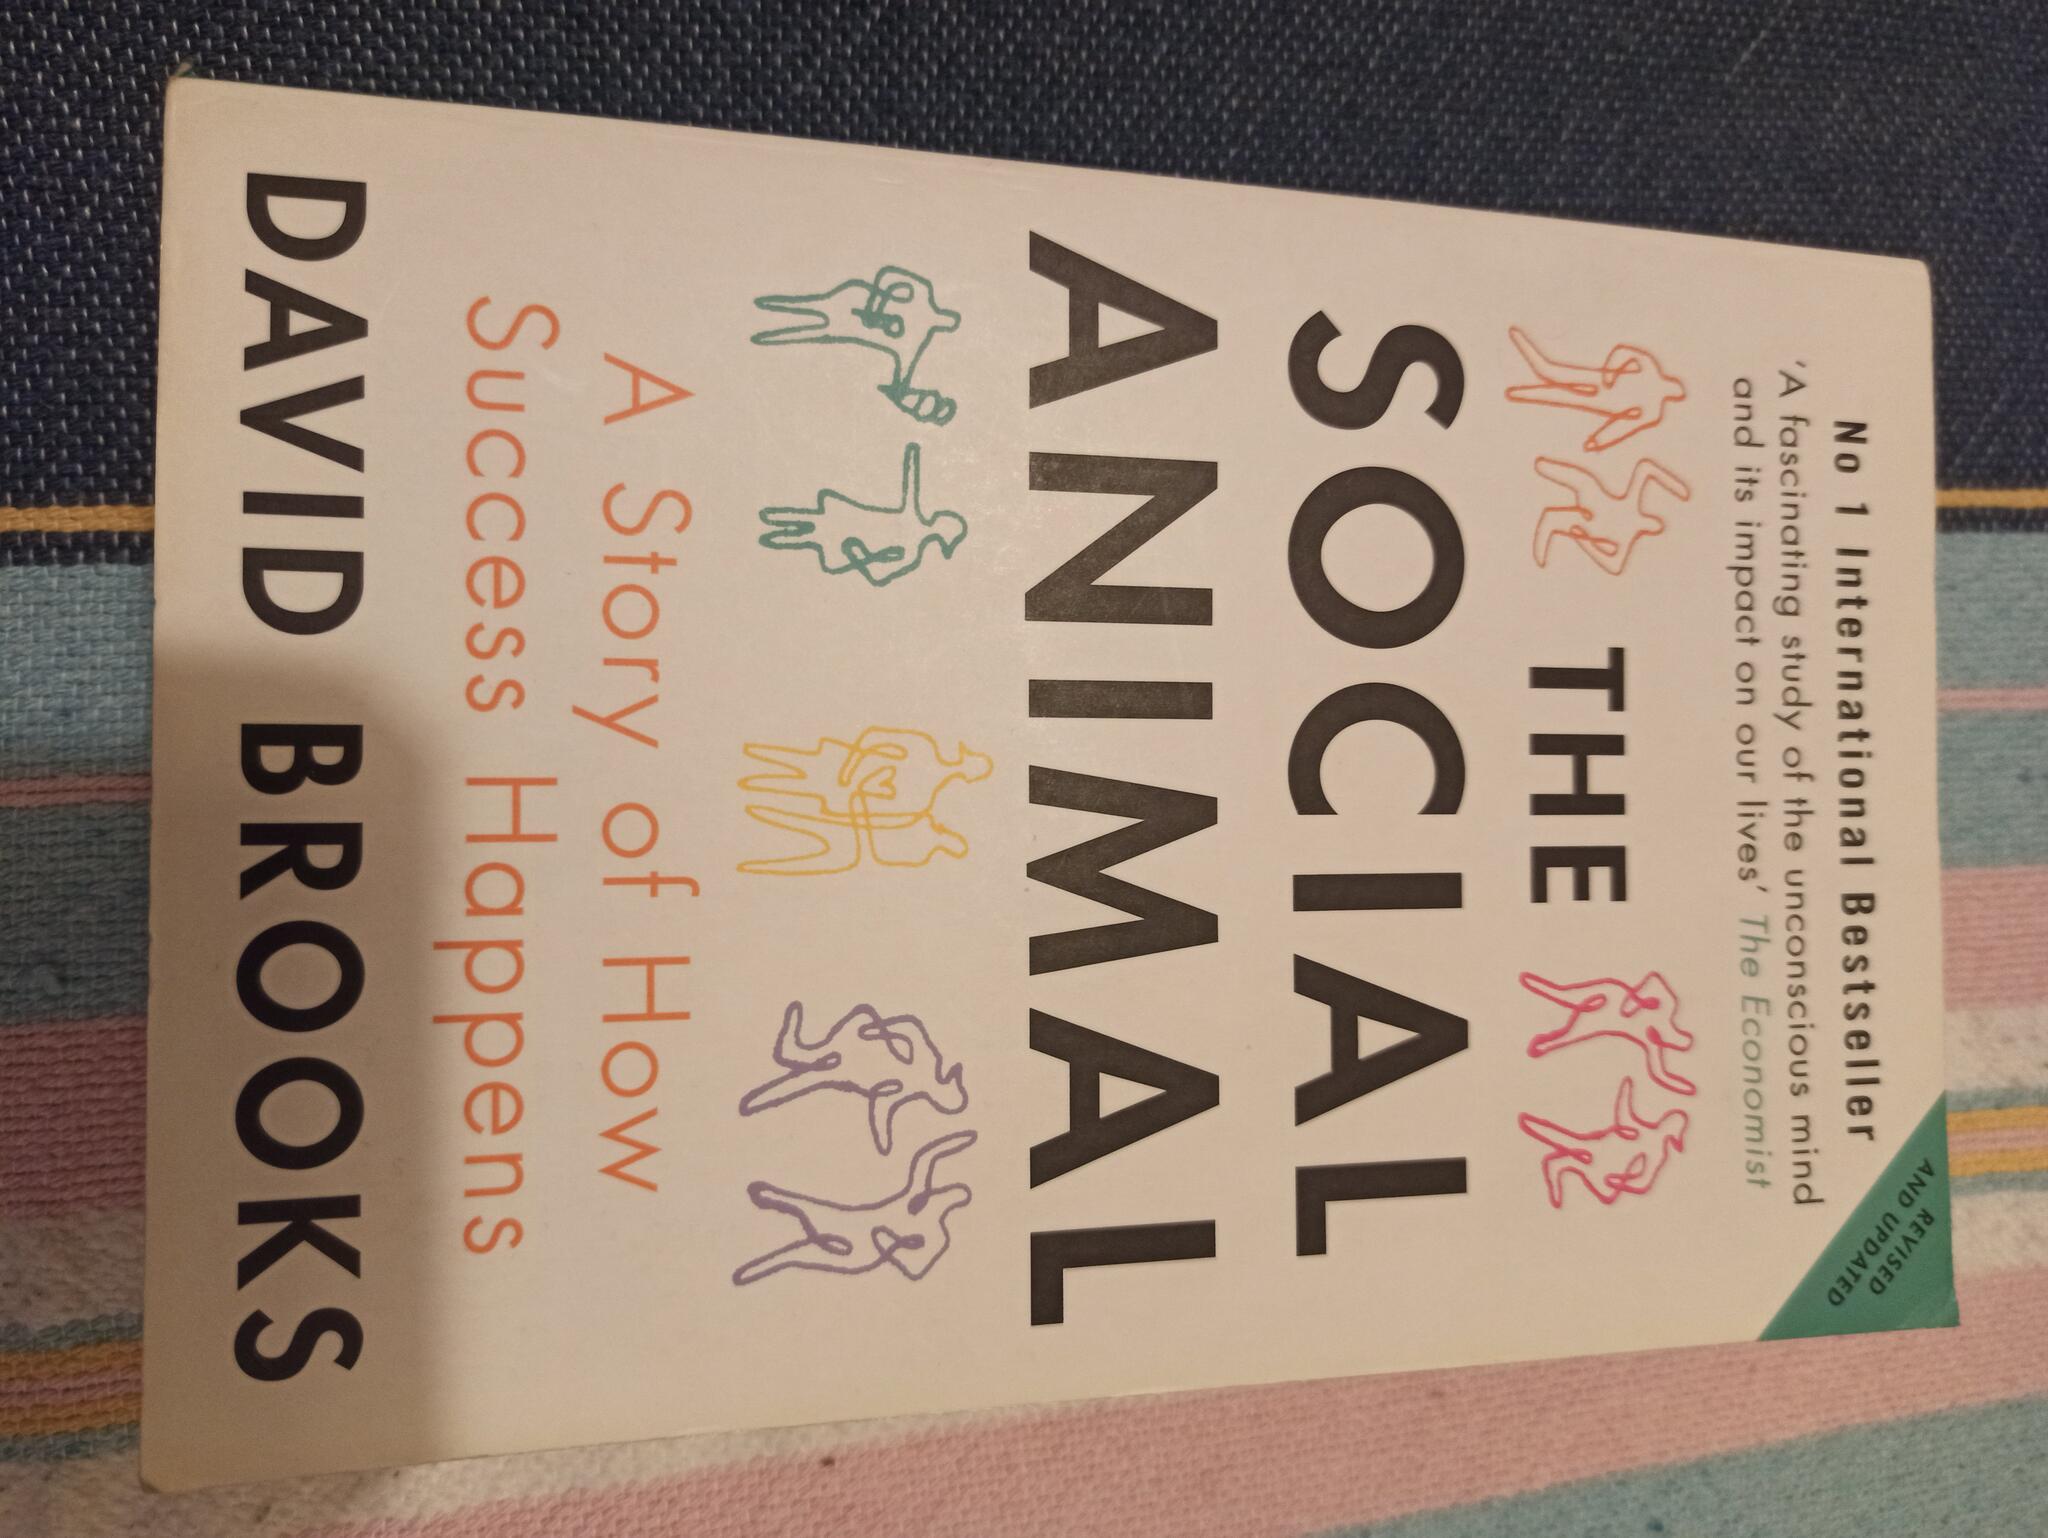 Social Animal By David Brooks For $4 In London, Engl& | For Sale & Free —  Nextdoor